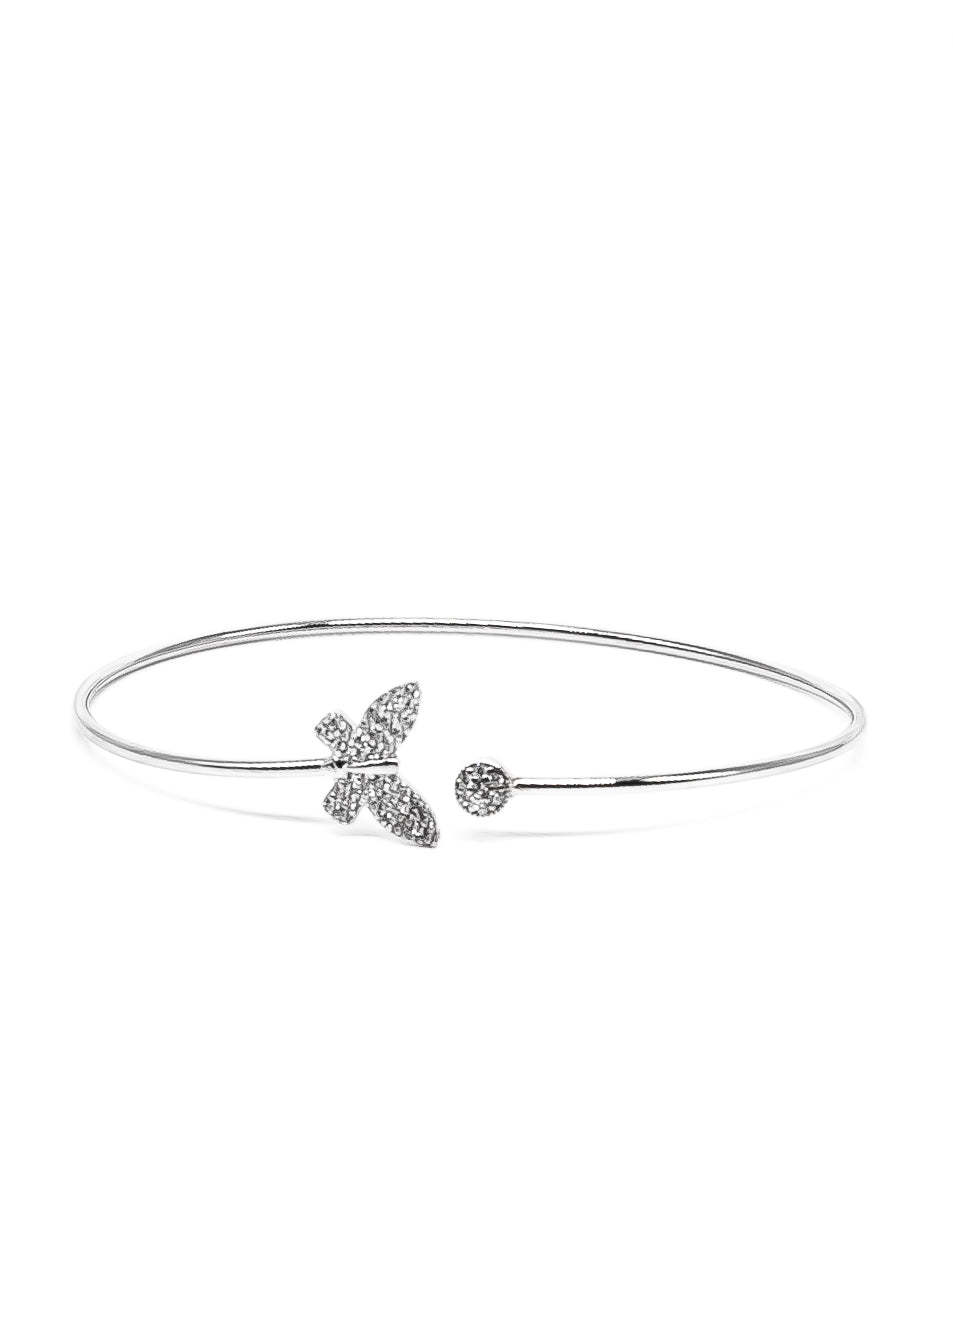 Stainless Steel Preciosa Crystal Butterfly Cuff Bangle Bracelet